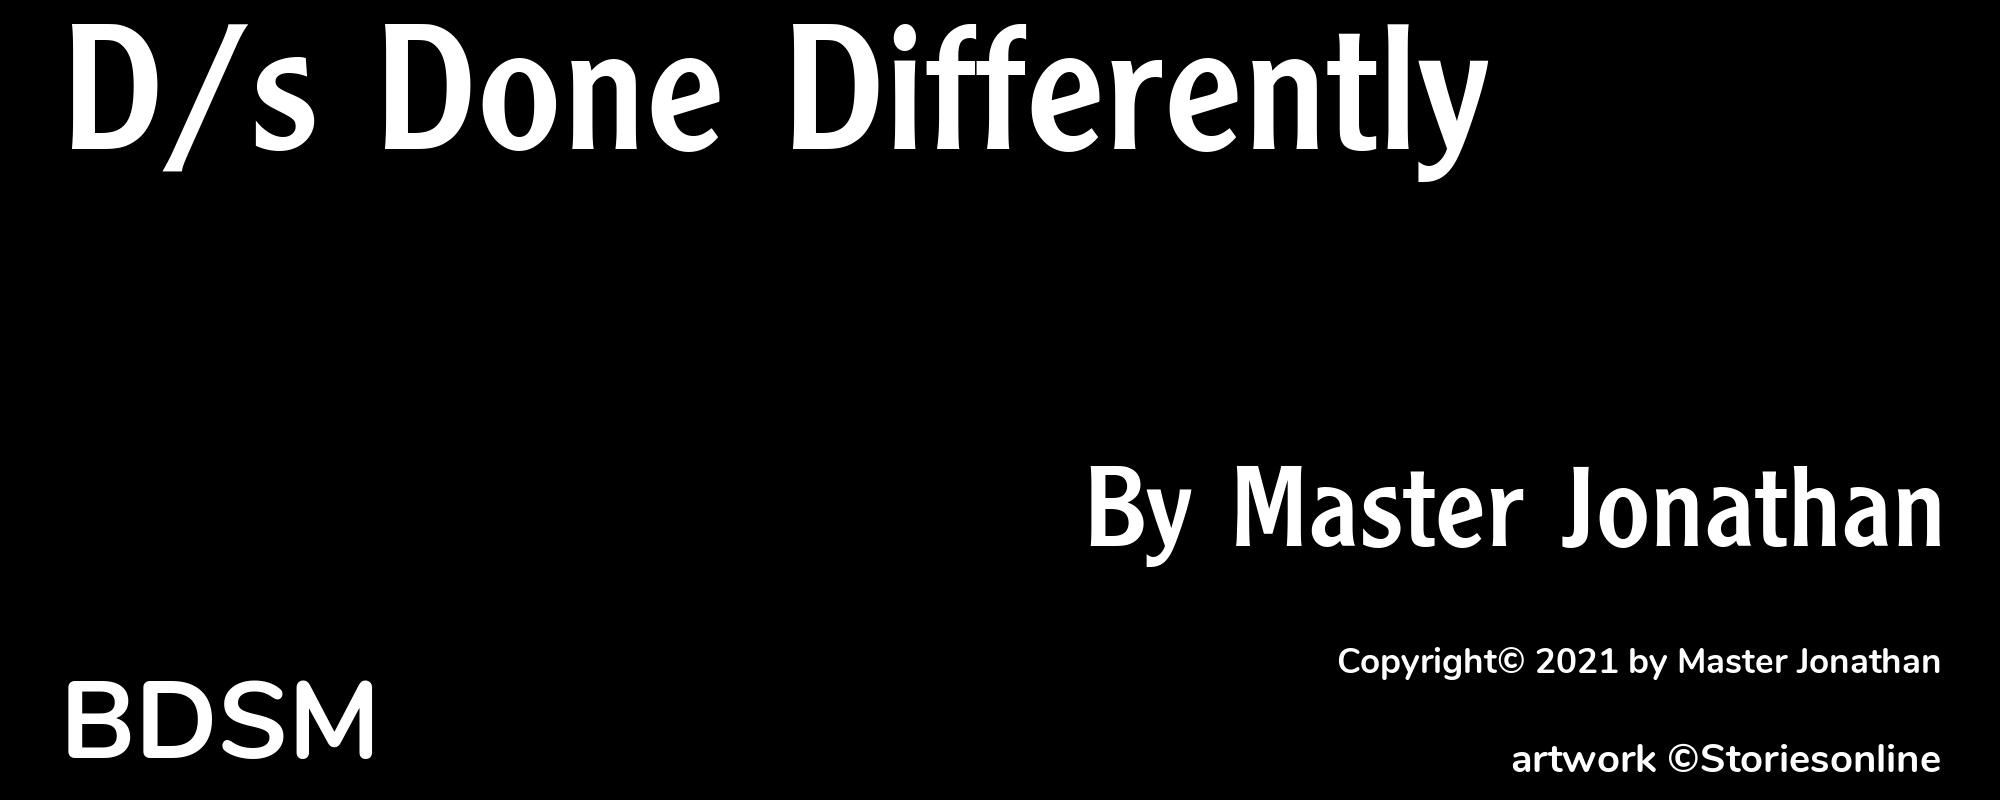 D/s Done Differently - Cover